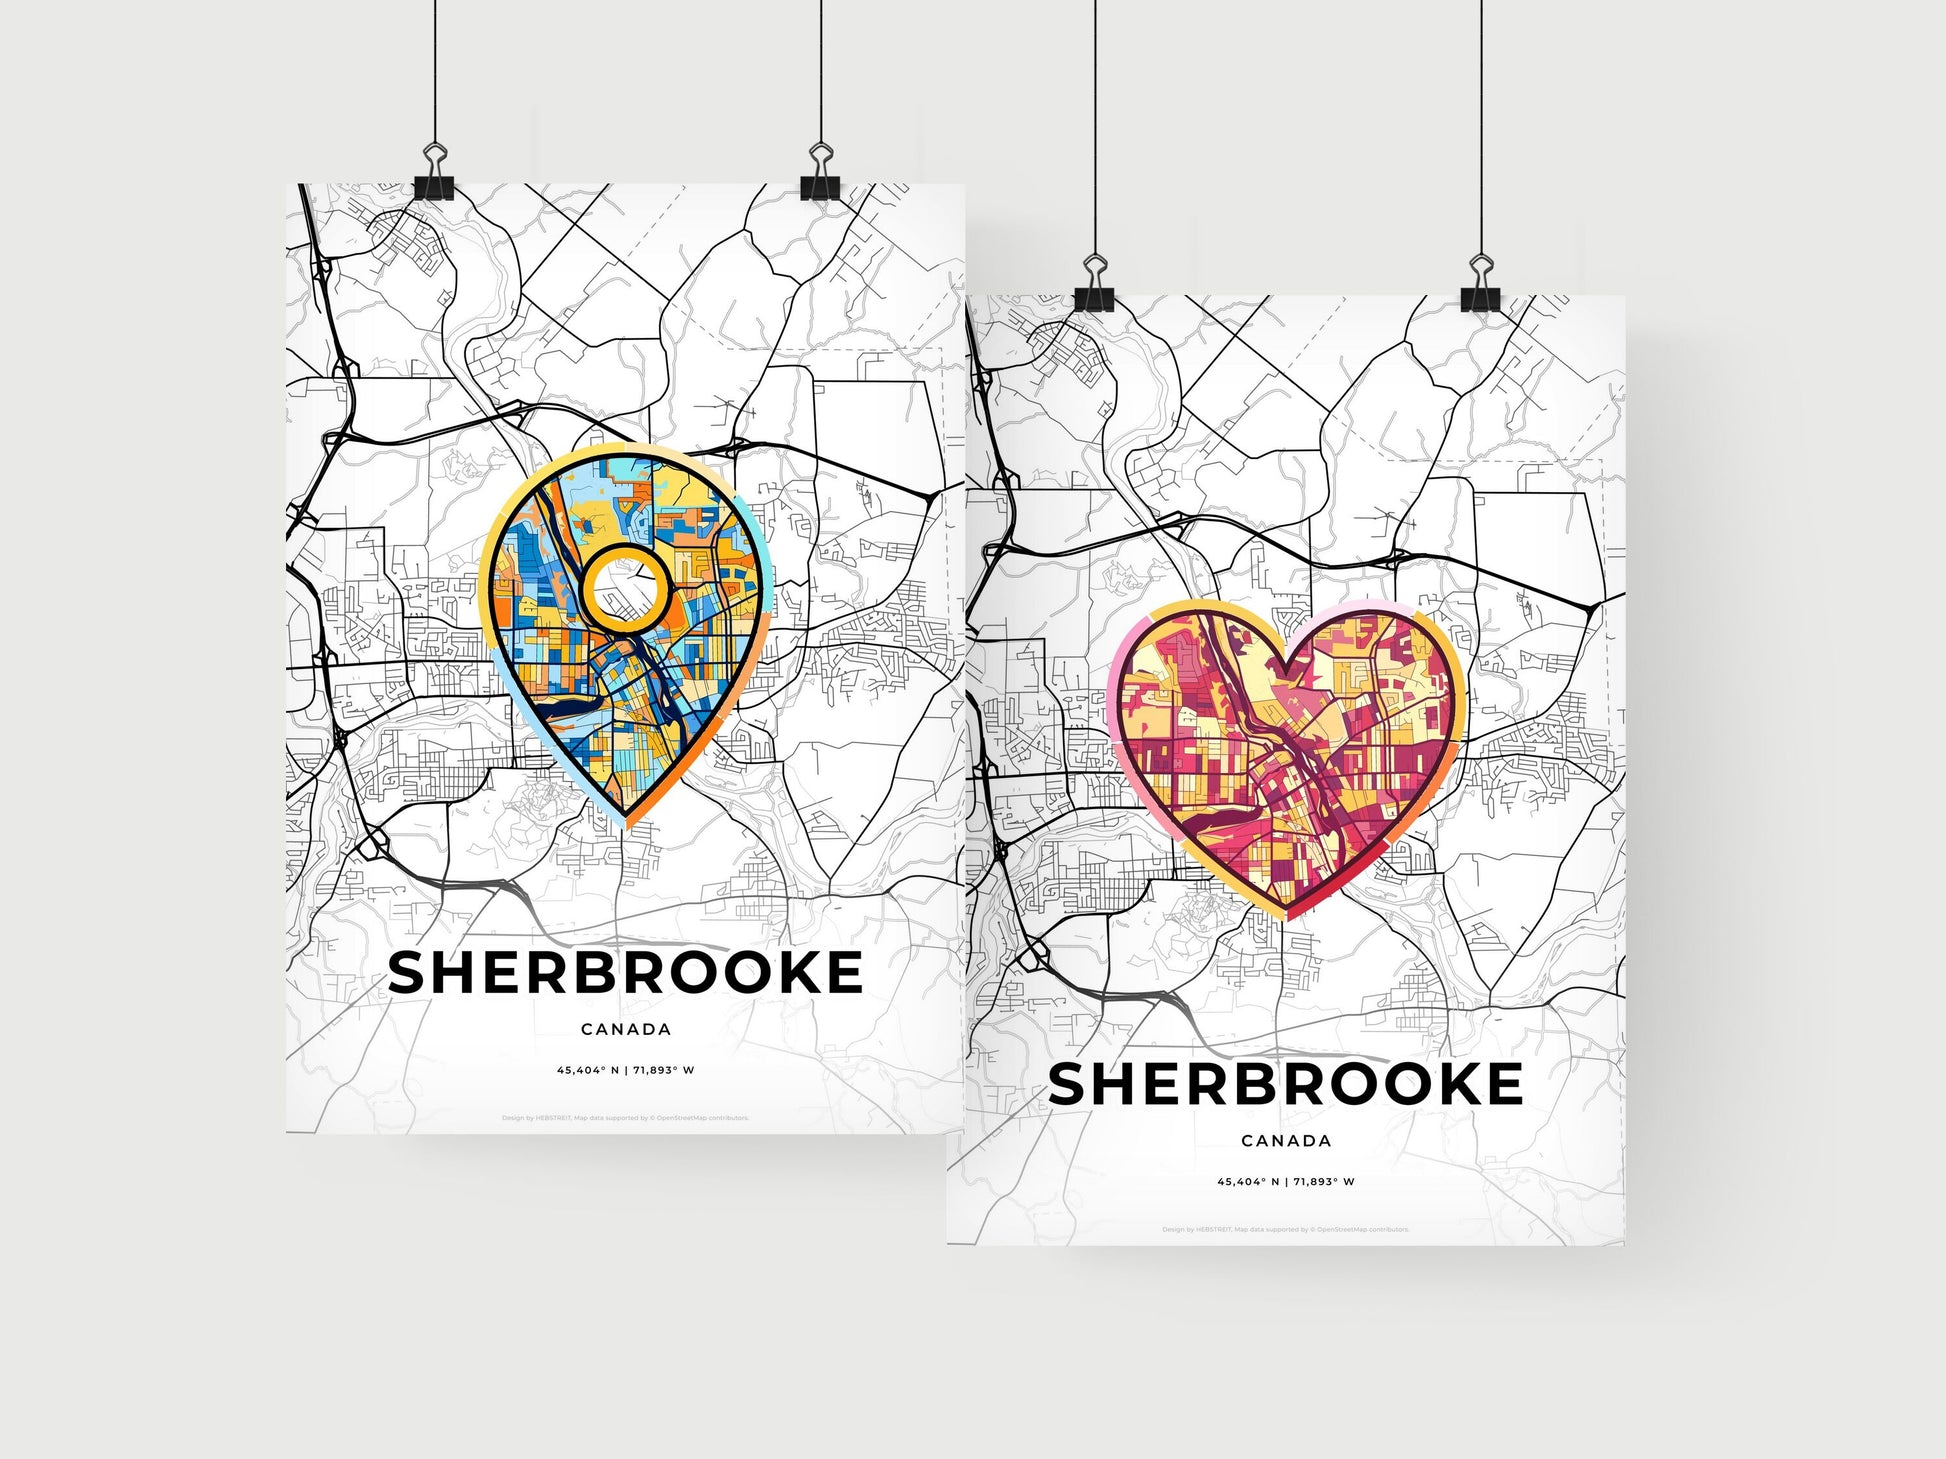 SHERBROOKE CANADA minimal art map with a colorful icon.